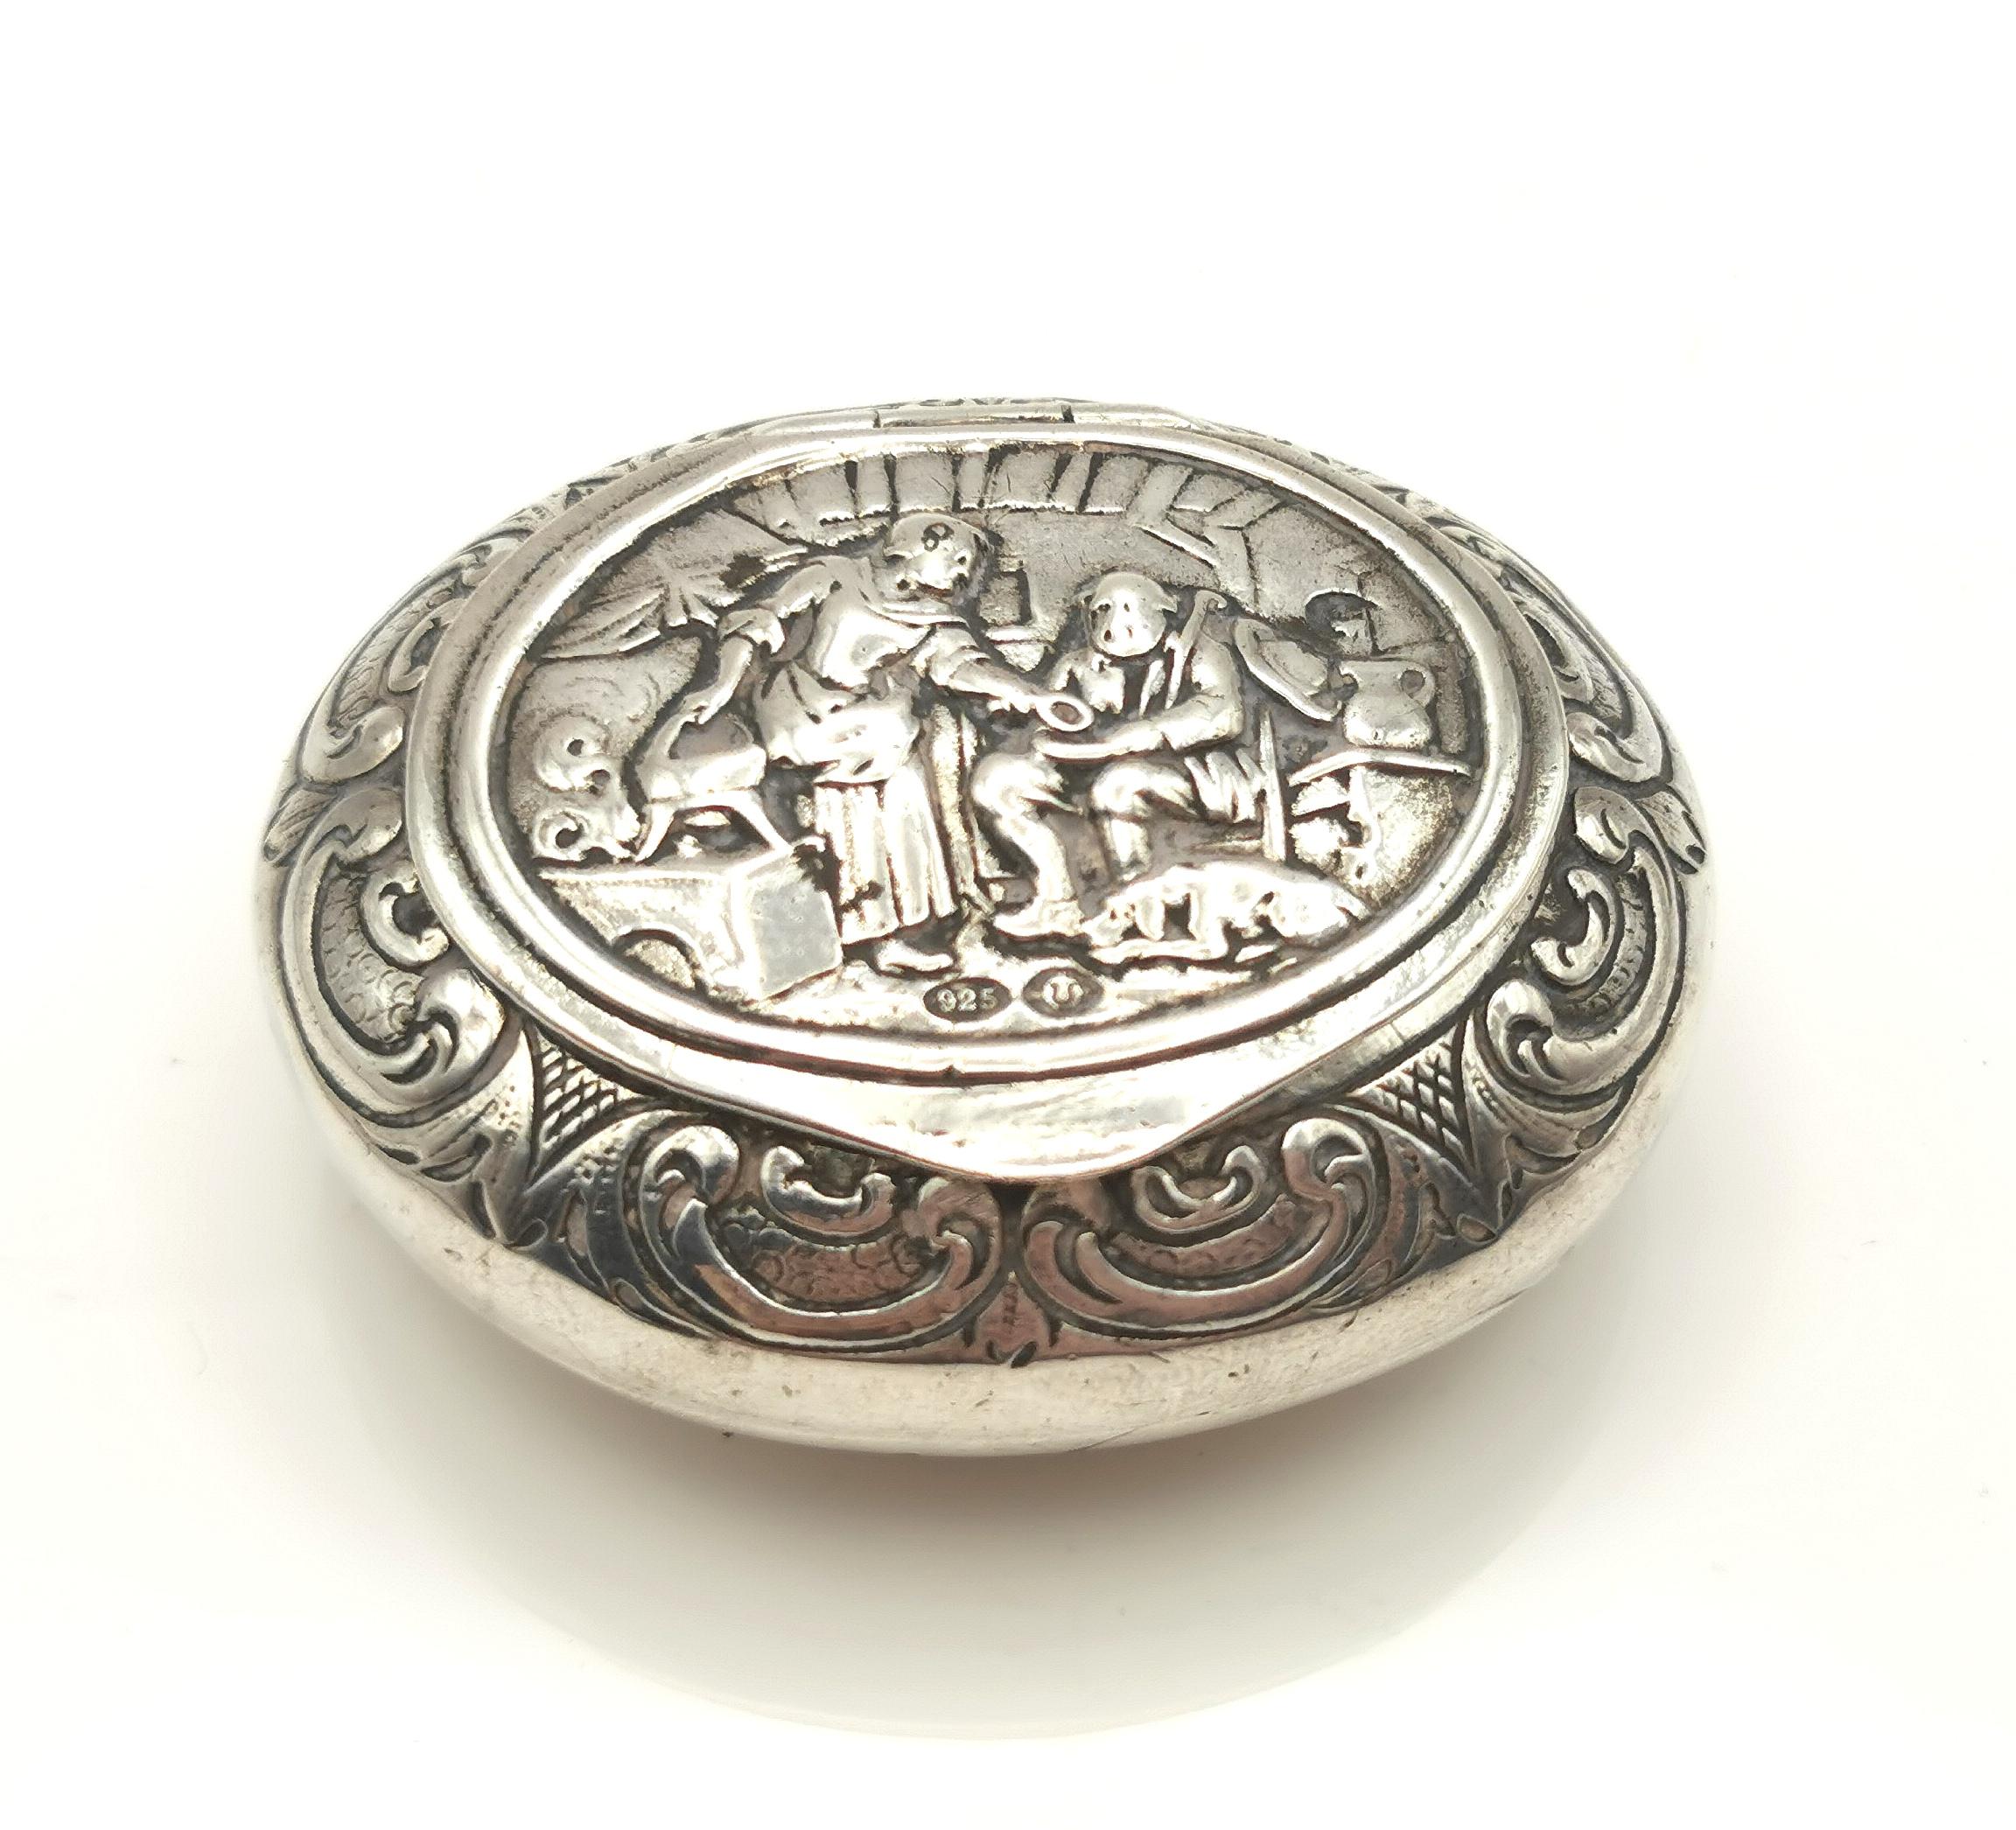 An attractive and decorative antique sterling silver snuff box.

It is a rounded oval shape, very ergonomic to slip into the pocket and it has a wonderful pictorial design to the lid in relief.

The scene is a home scene and features a woman by the